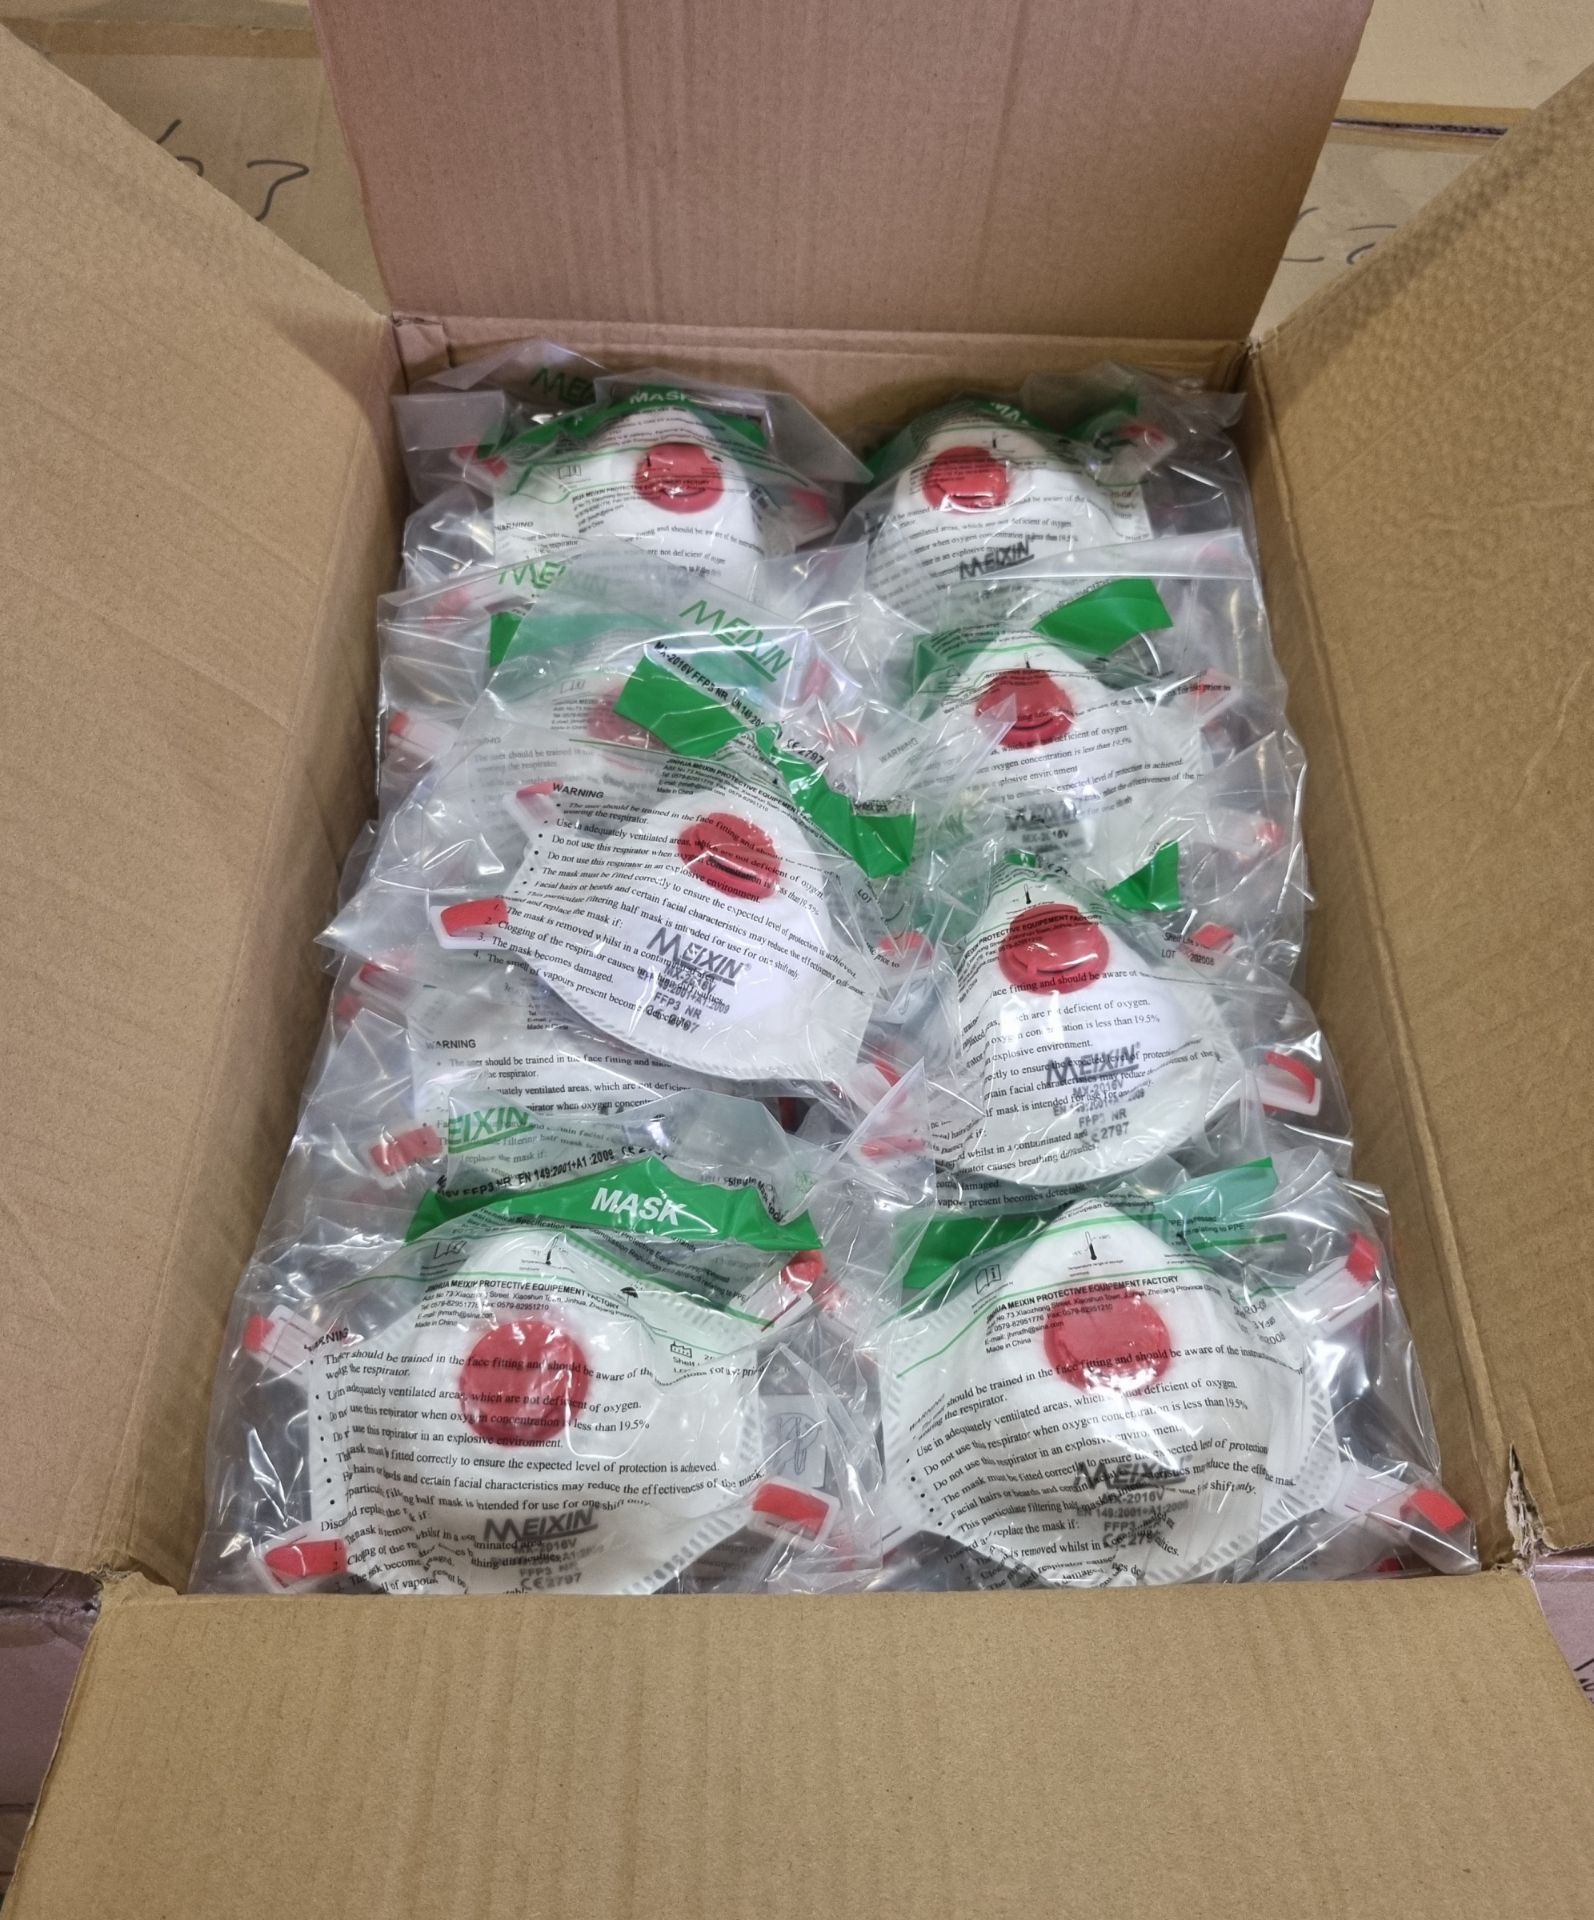 10x boxes of Meixin MX-2016V FFP3 dust mask/respirator - 200 units per box - OUT OF DATE - Image 2 of 4